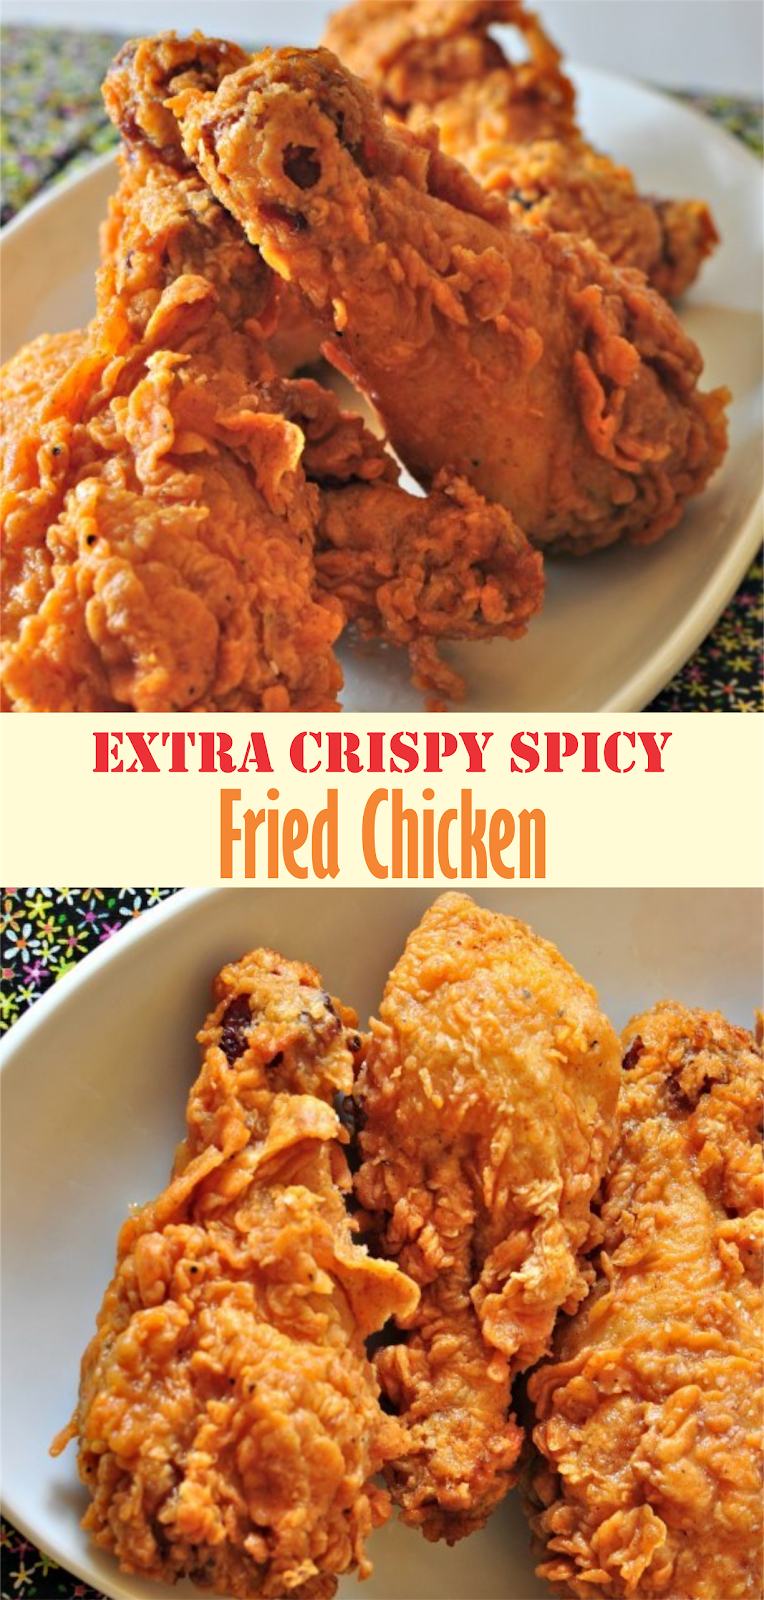 Extra Crispy Spicy Fried Chicken | EAT